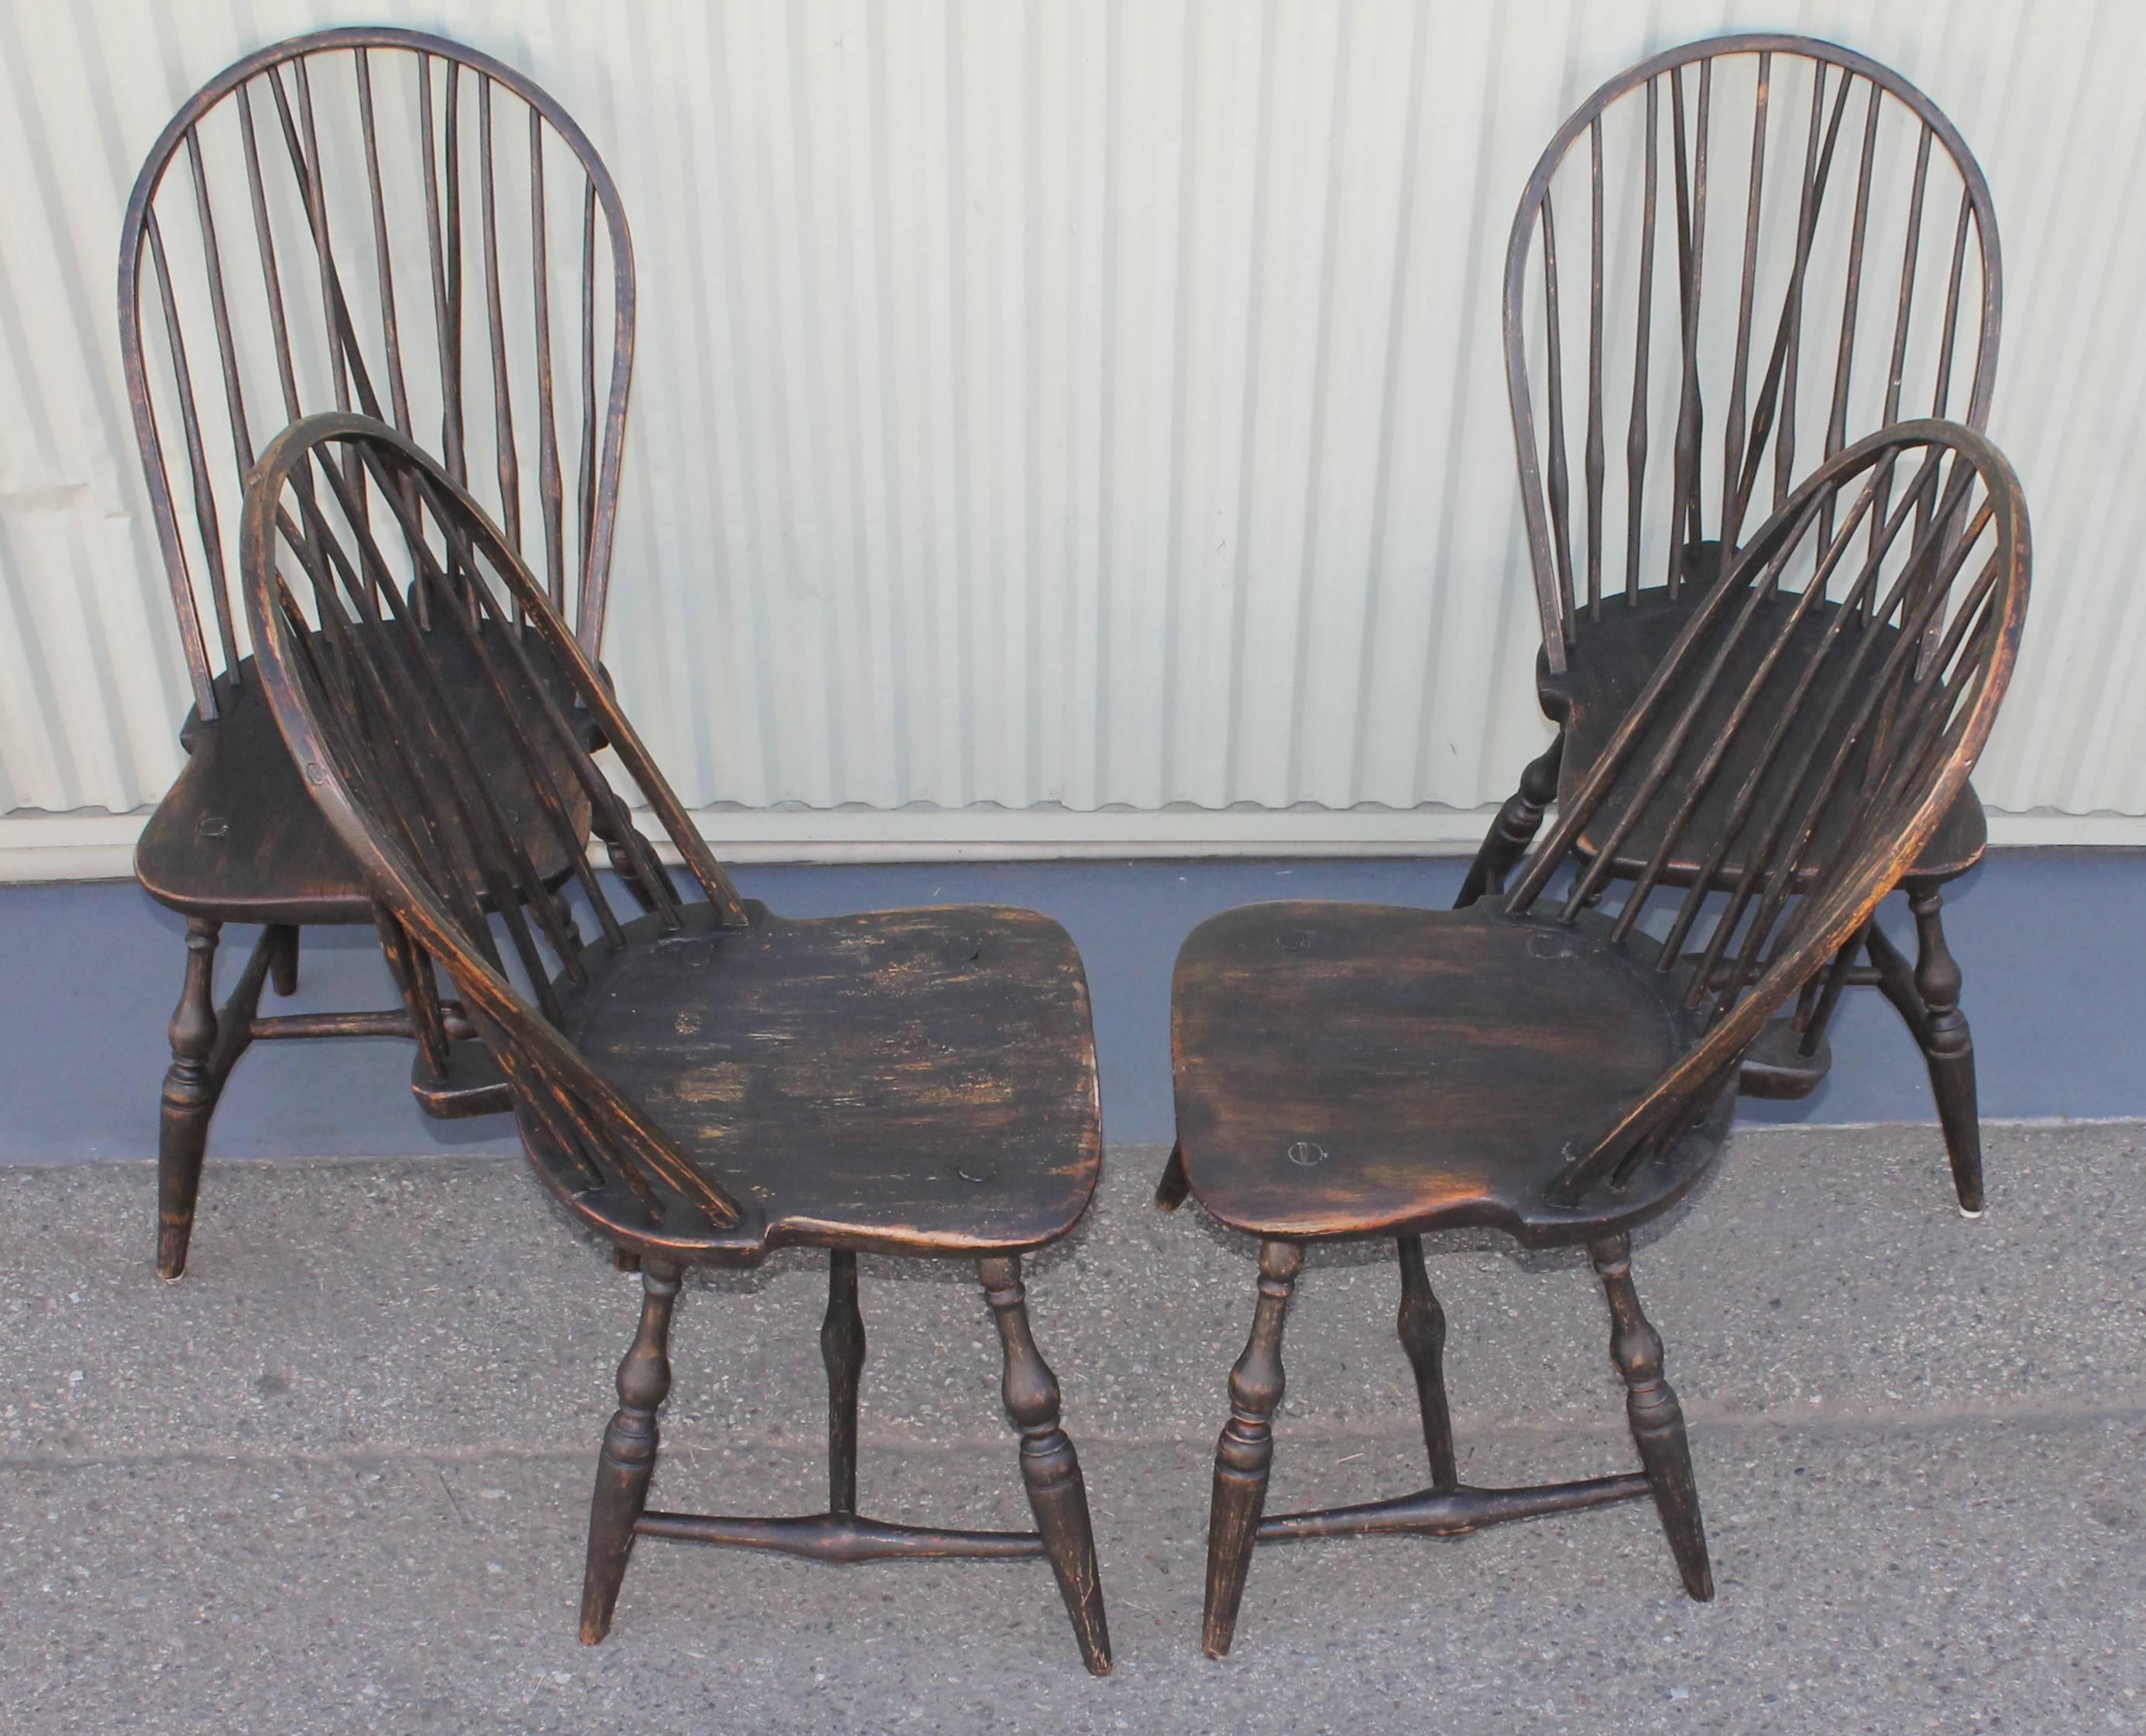 Country 18th Century Set of Four Brace Back, New England, Windsor Chairs